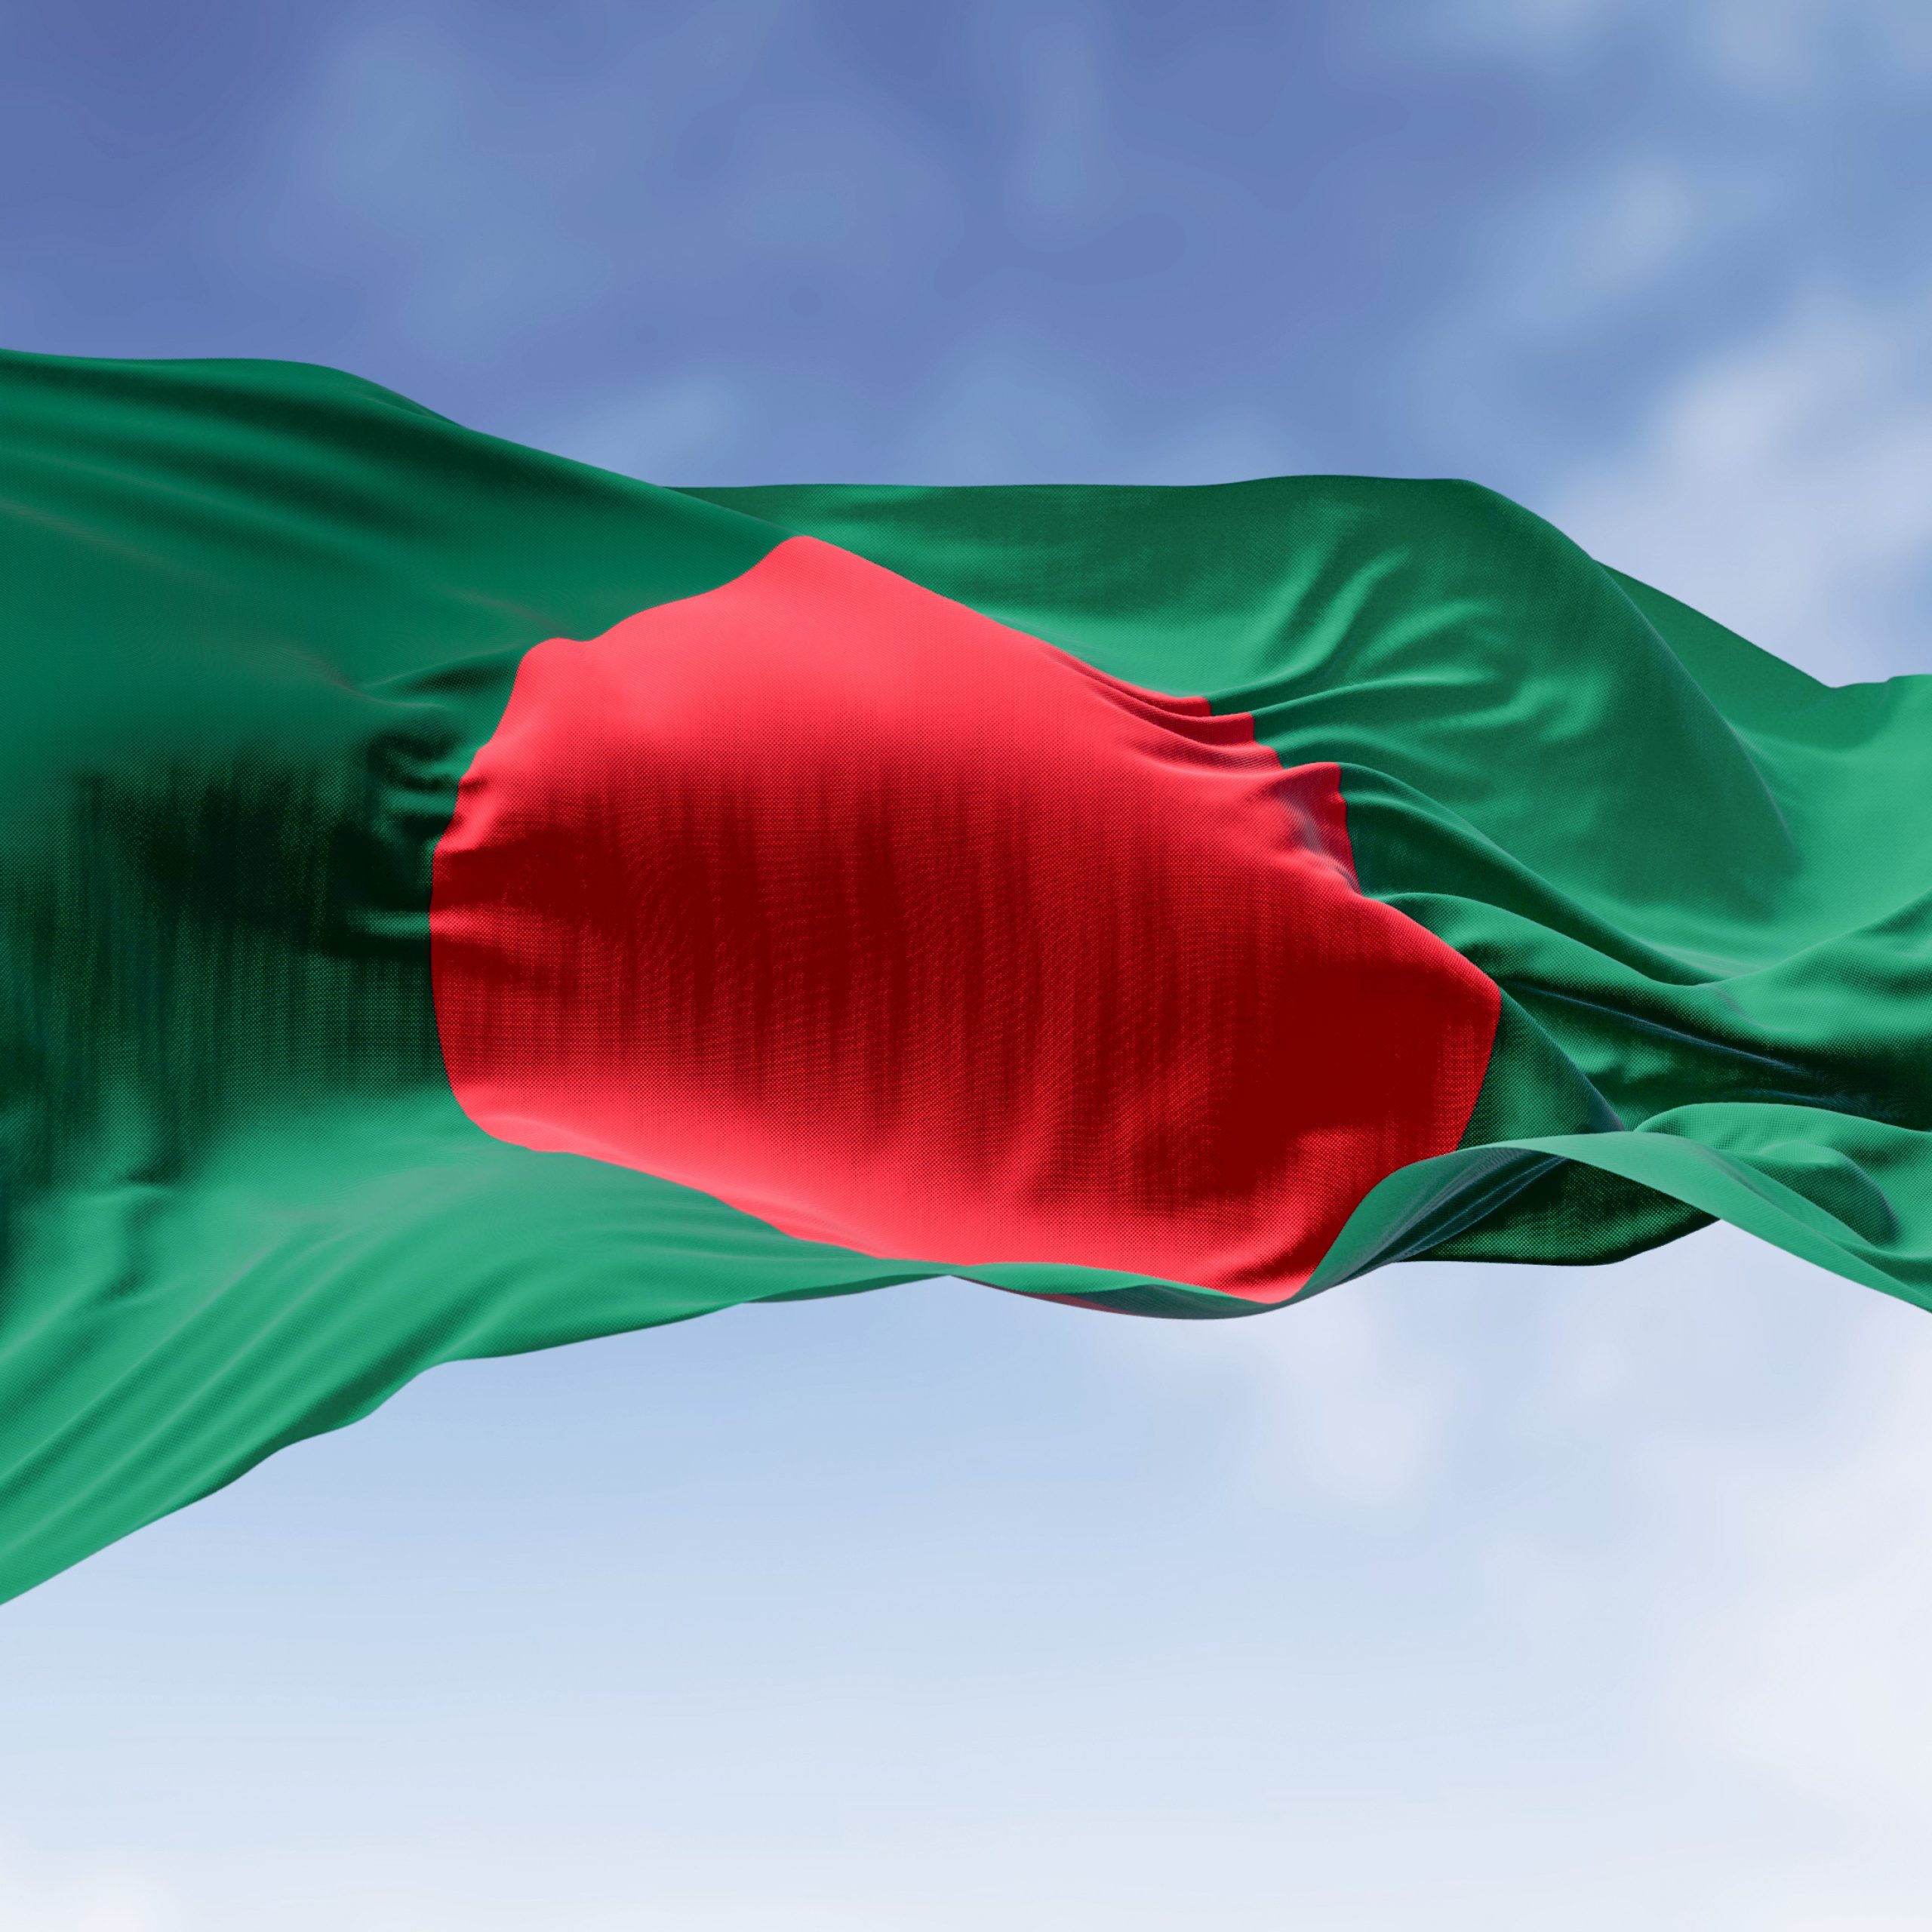 National flag of Bangladesh waving in the wind on a clear day. Dark green banner with a red disc or sun on top. 3d illustration render. Fluttering fabric